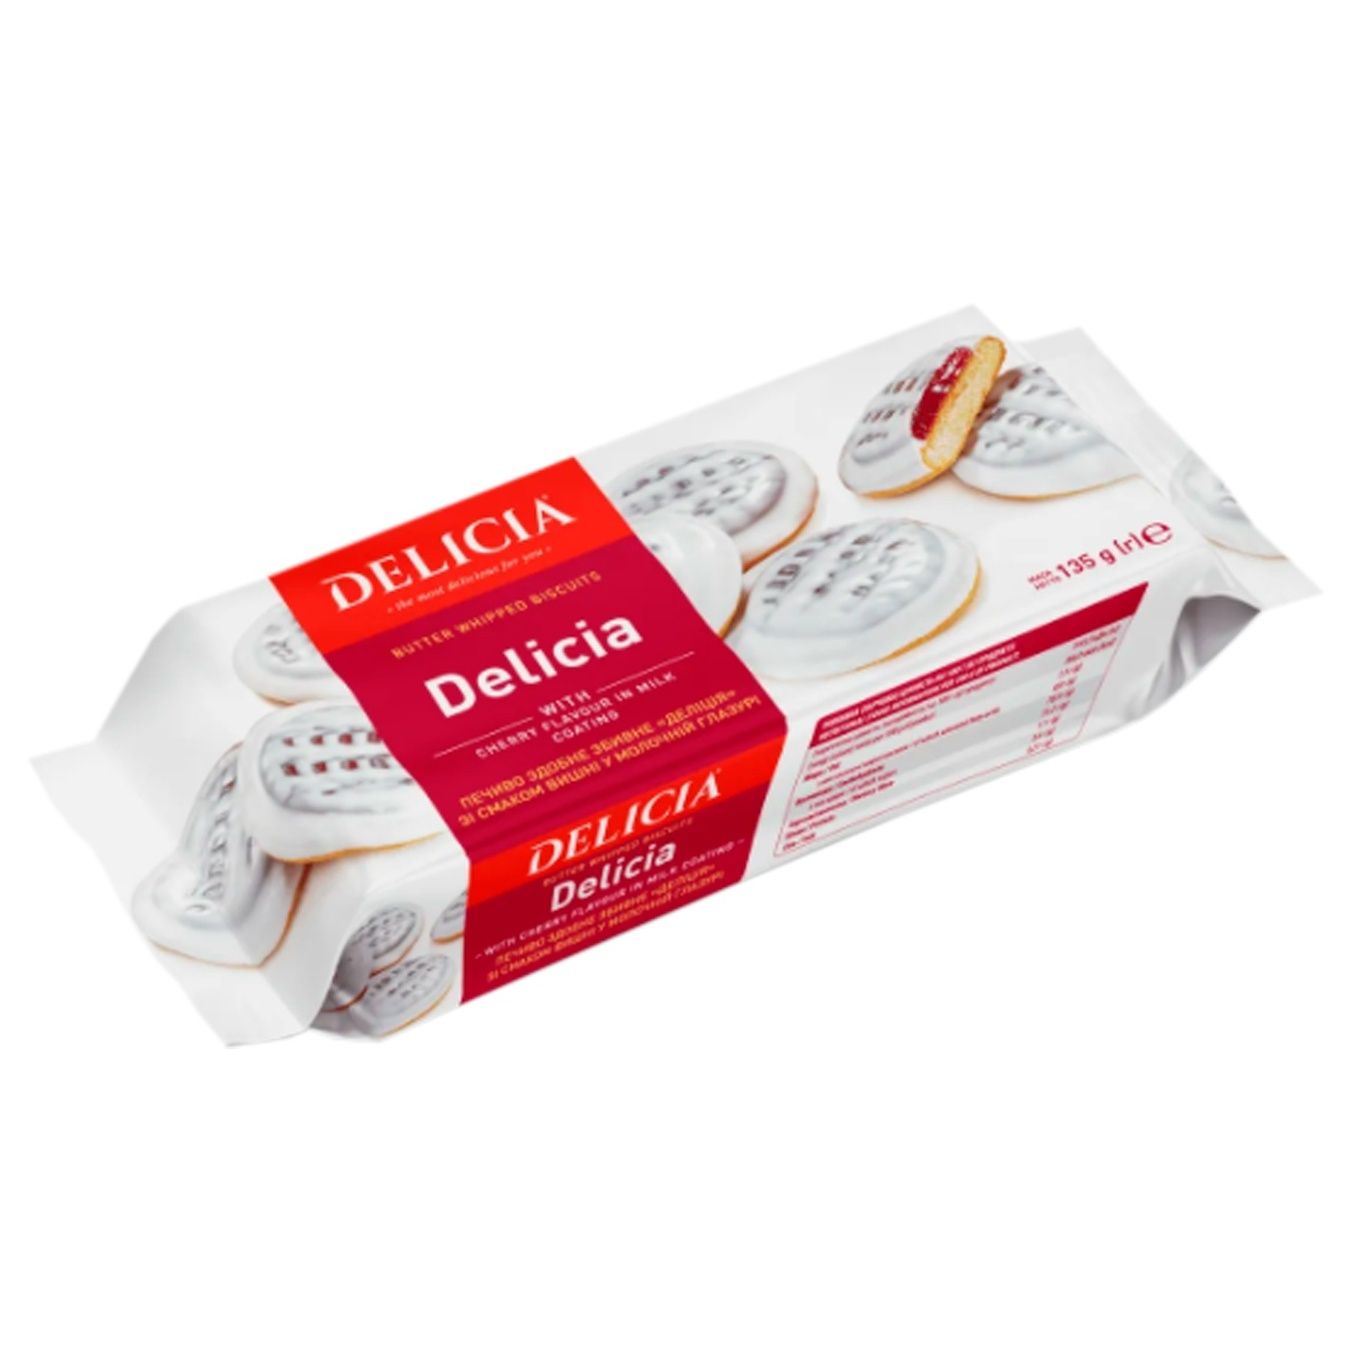 Delicia Positive In Milk Glaze With Cherry Taste Butter Cookies 135g